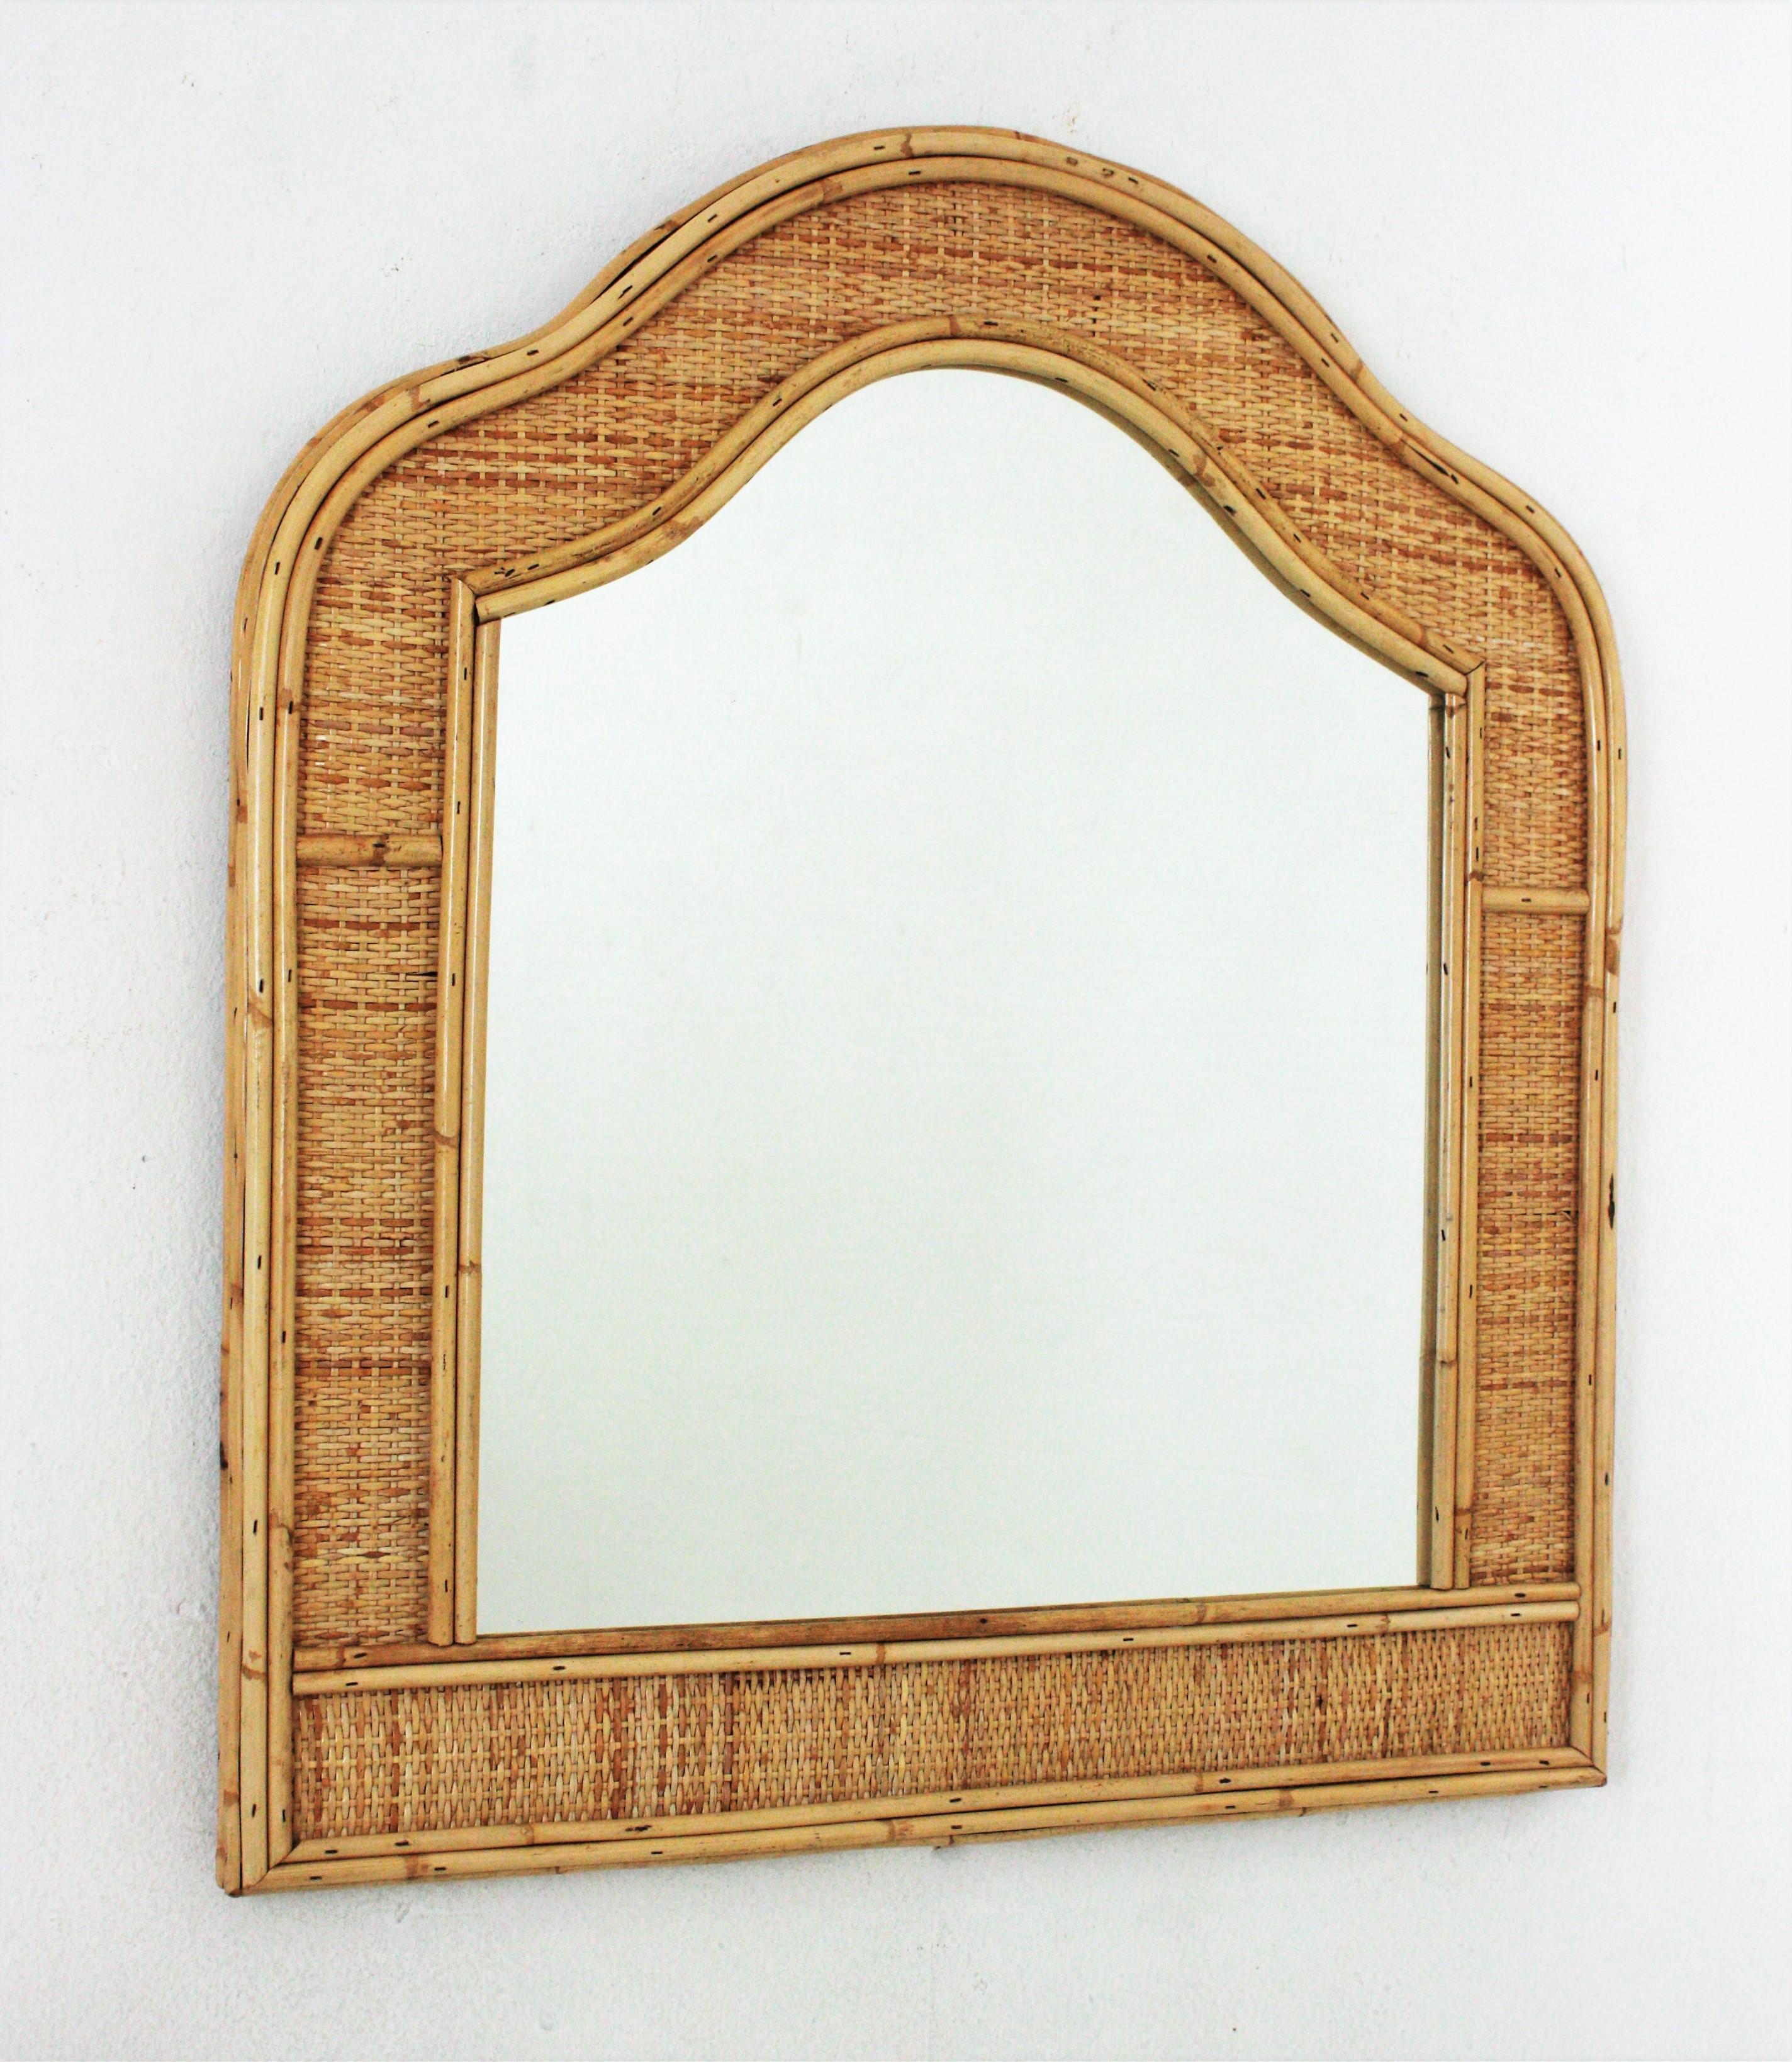 Large Wall Mirror with Arched Top in Rattan and Wicker, Italy, 1960-1970.
Elegant mid-20th century woven wicker, bamboo rattan mirror with arched top. Eye-catching design with all the taste of the French Riviera style.
This beautiful mirror double